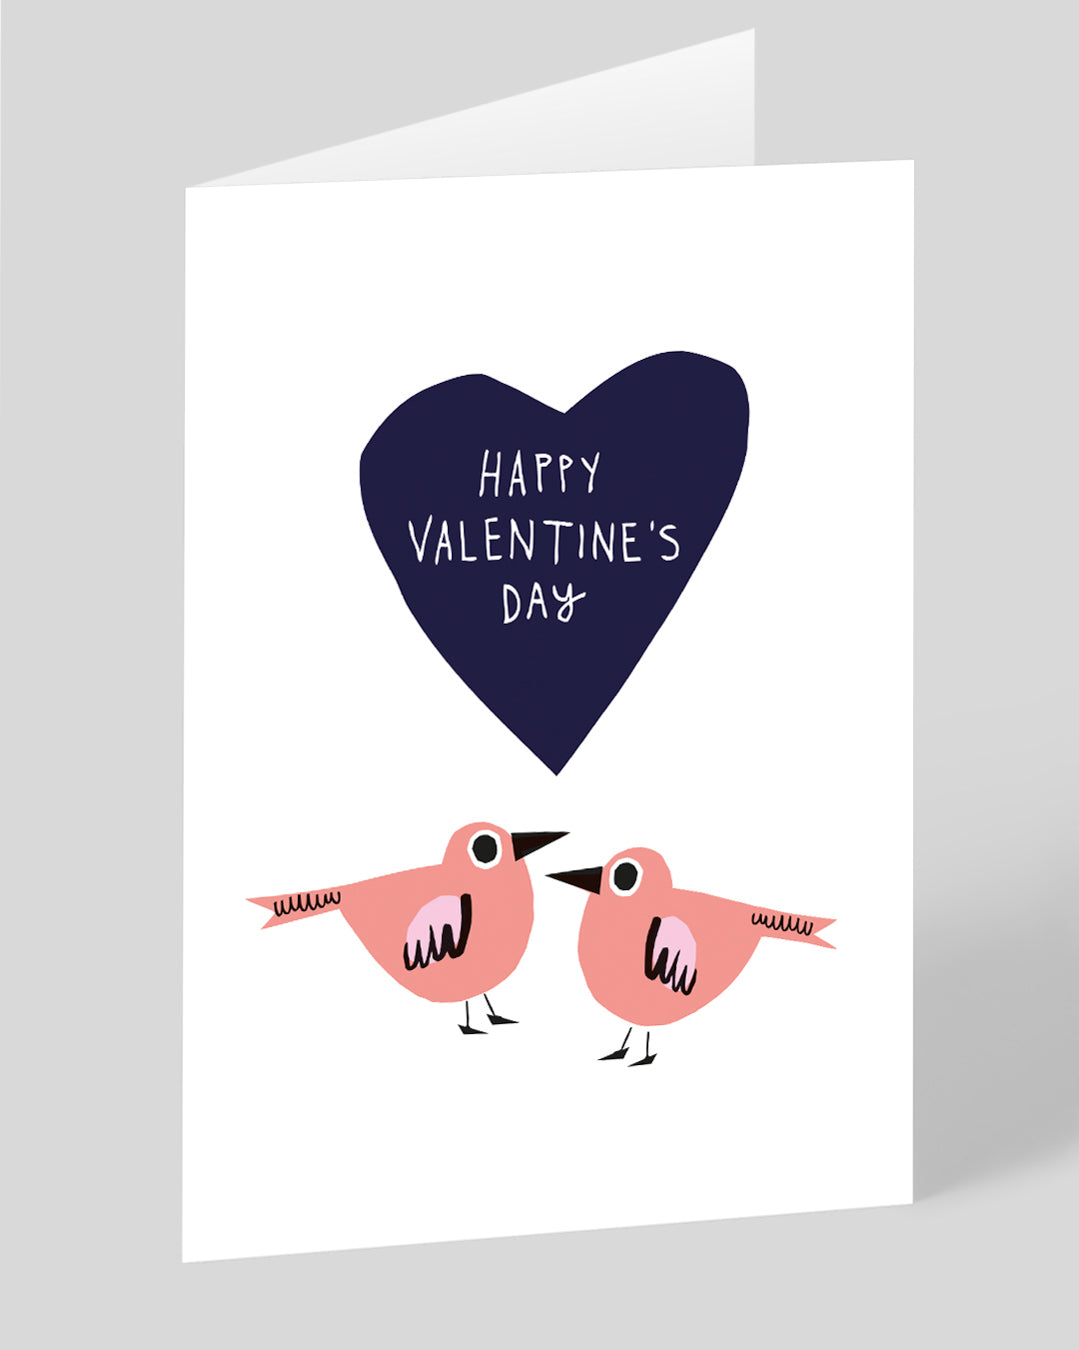 Valentine’s Day | Cute Valentines Card For Bird Lovers | Personalised Love Birds Valentine’s Day Card | Ohh Deer Unique Valentine’s Card for Him or Her | Made In The UK, Eco-Friendly Materials, Plastic Free Packaging